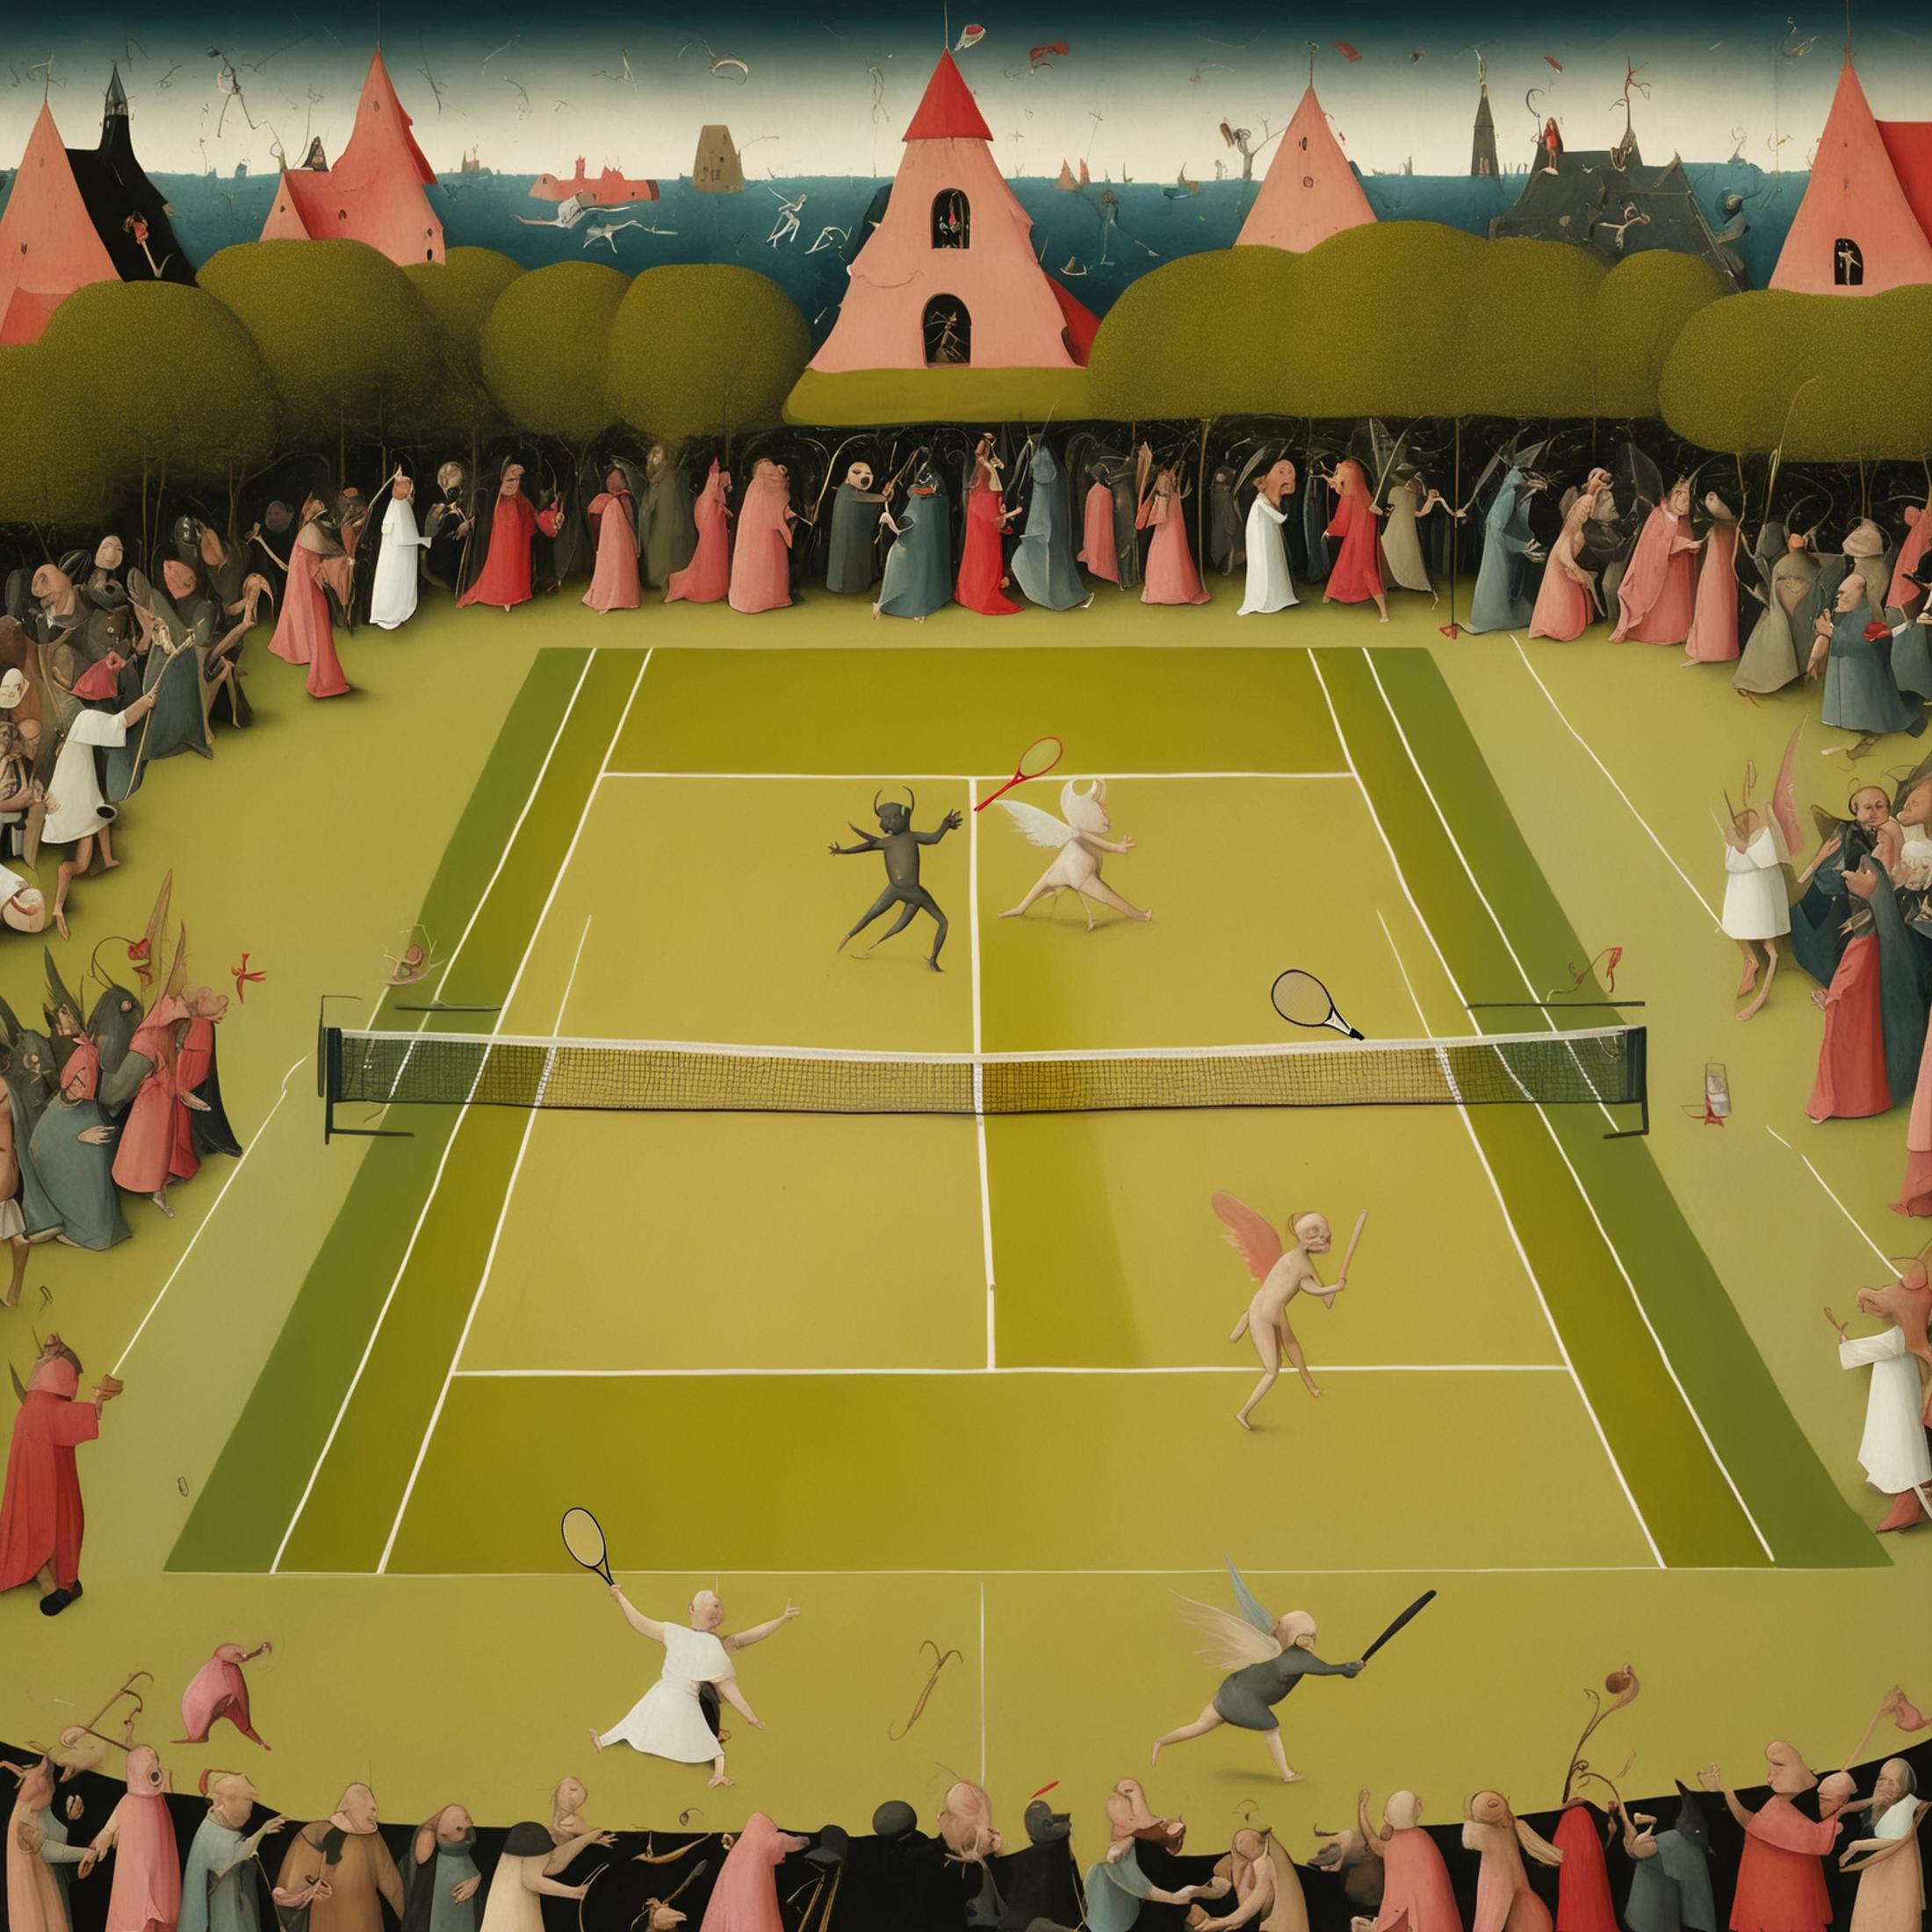 A painting of a tennis court with two players, surrounded by a crowd.